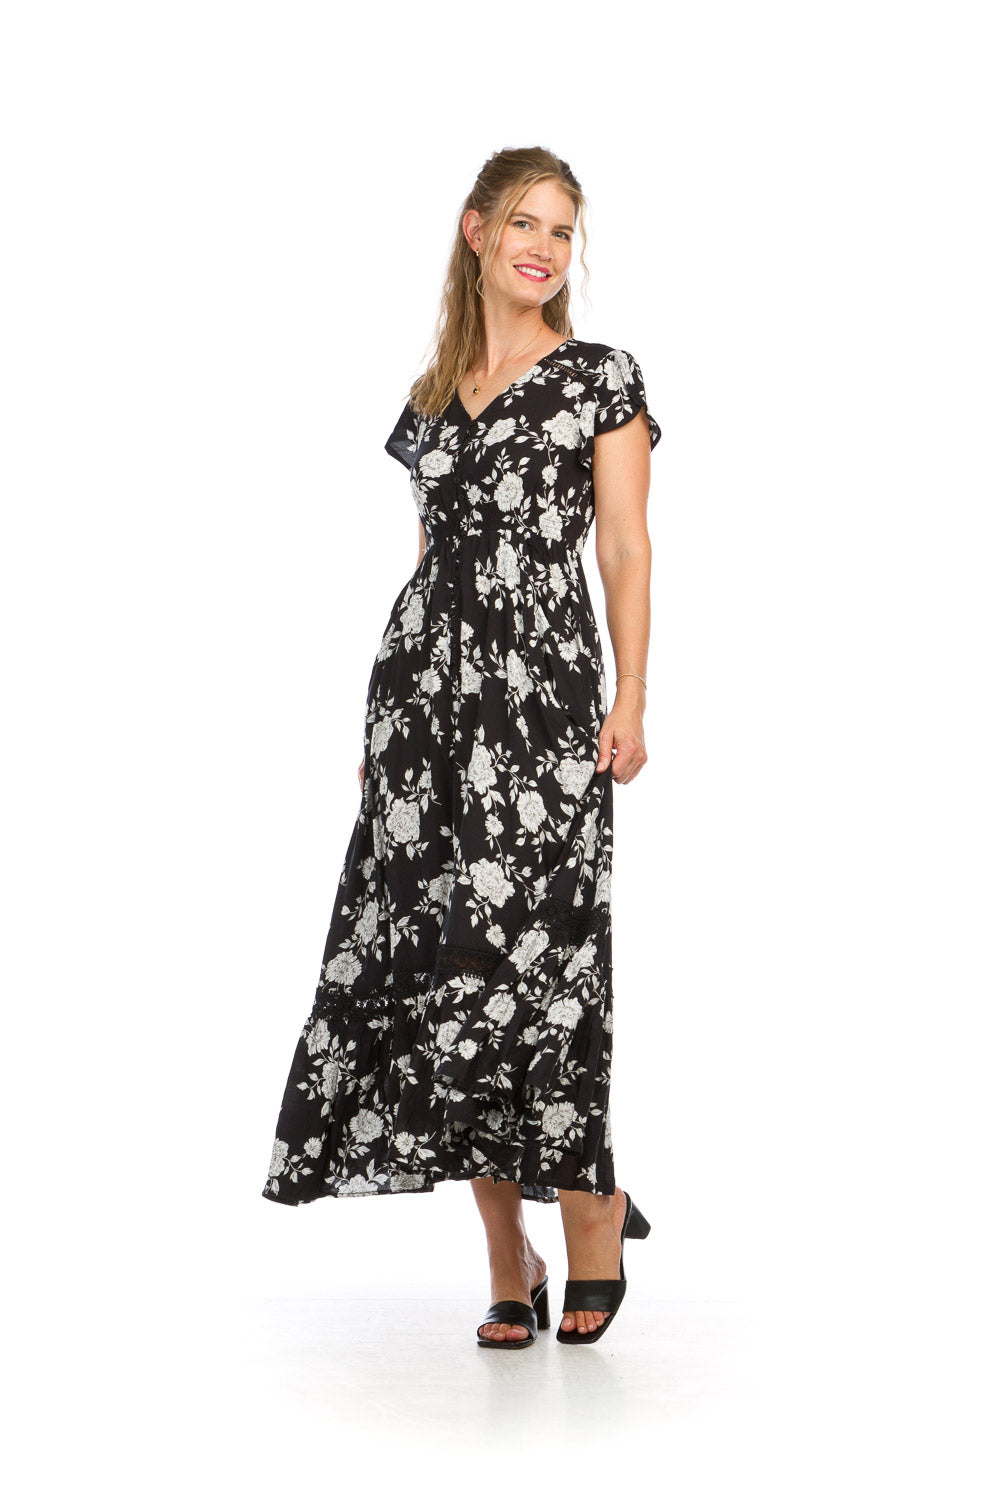 PD-14528 - FLORAL BUTTON FRONT MAXI DRESS WITH ELASTIC WAIST, LACE INSET, AND POCKETS